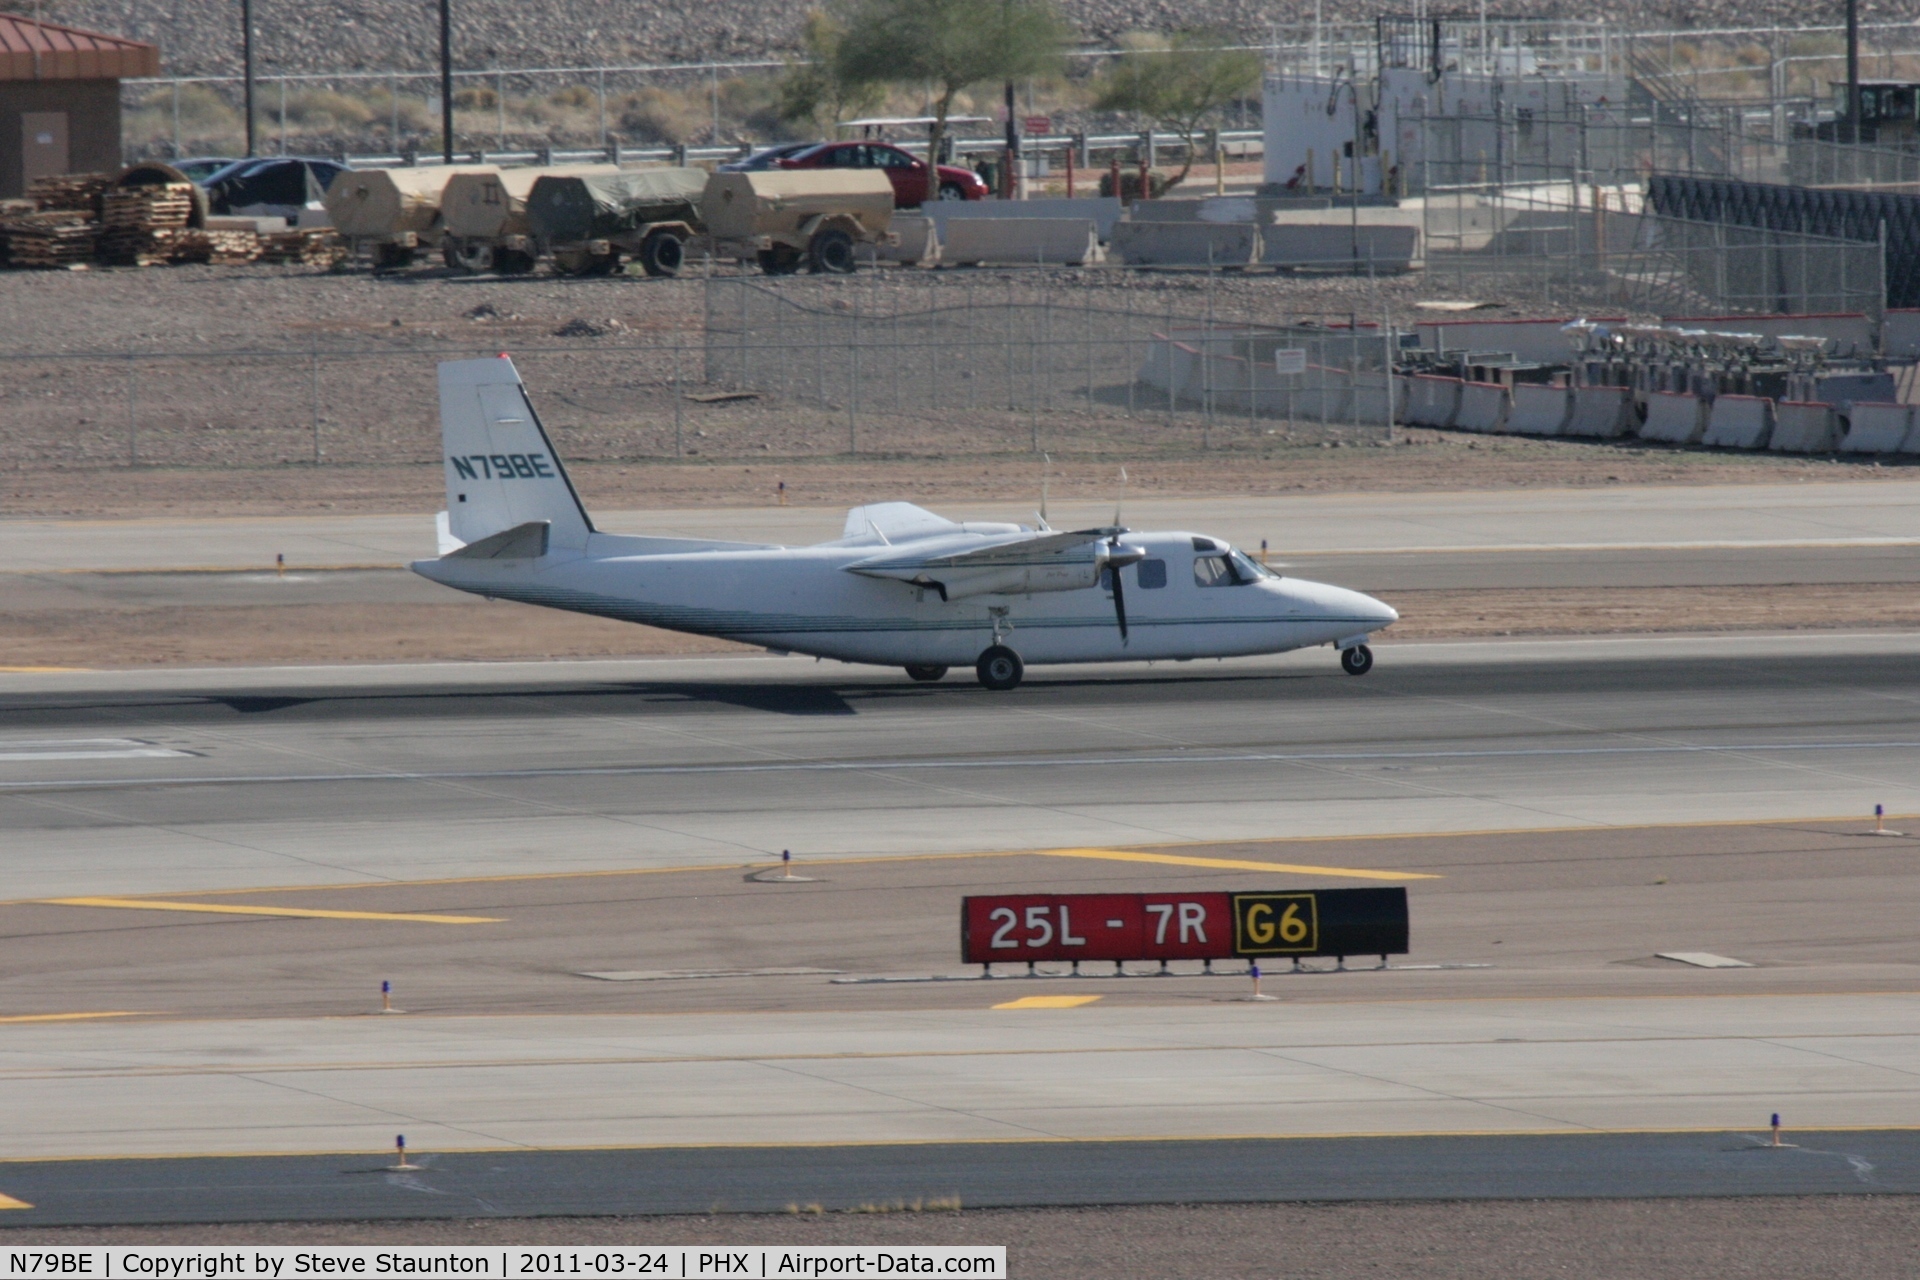 N79BE, 1977 Rockwell 690B Turbo Commander C/N 11408, Taken at Phoenix Sky Harbor Airport, in March 2011 whilst on an Aeroprint Aviation tour